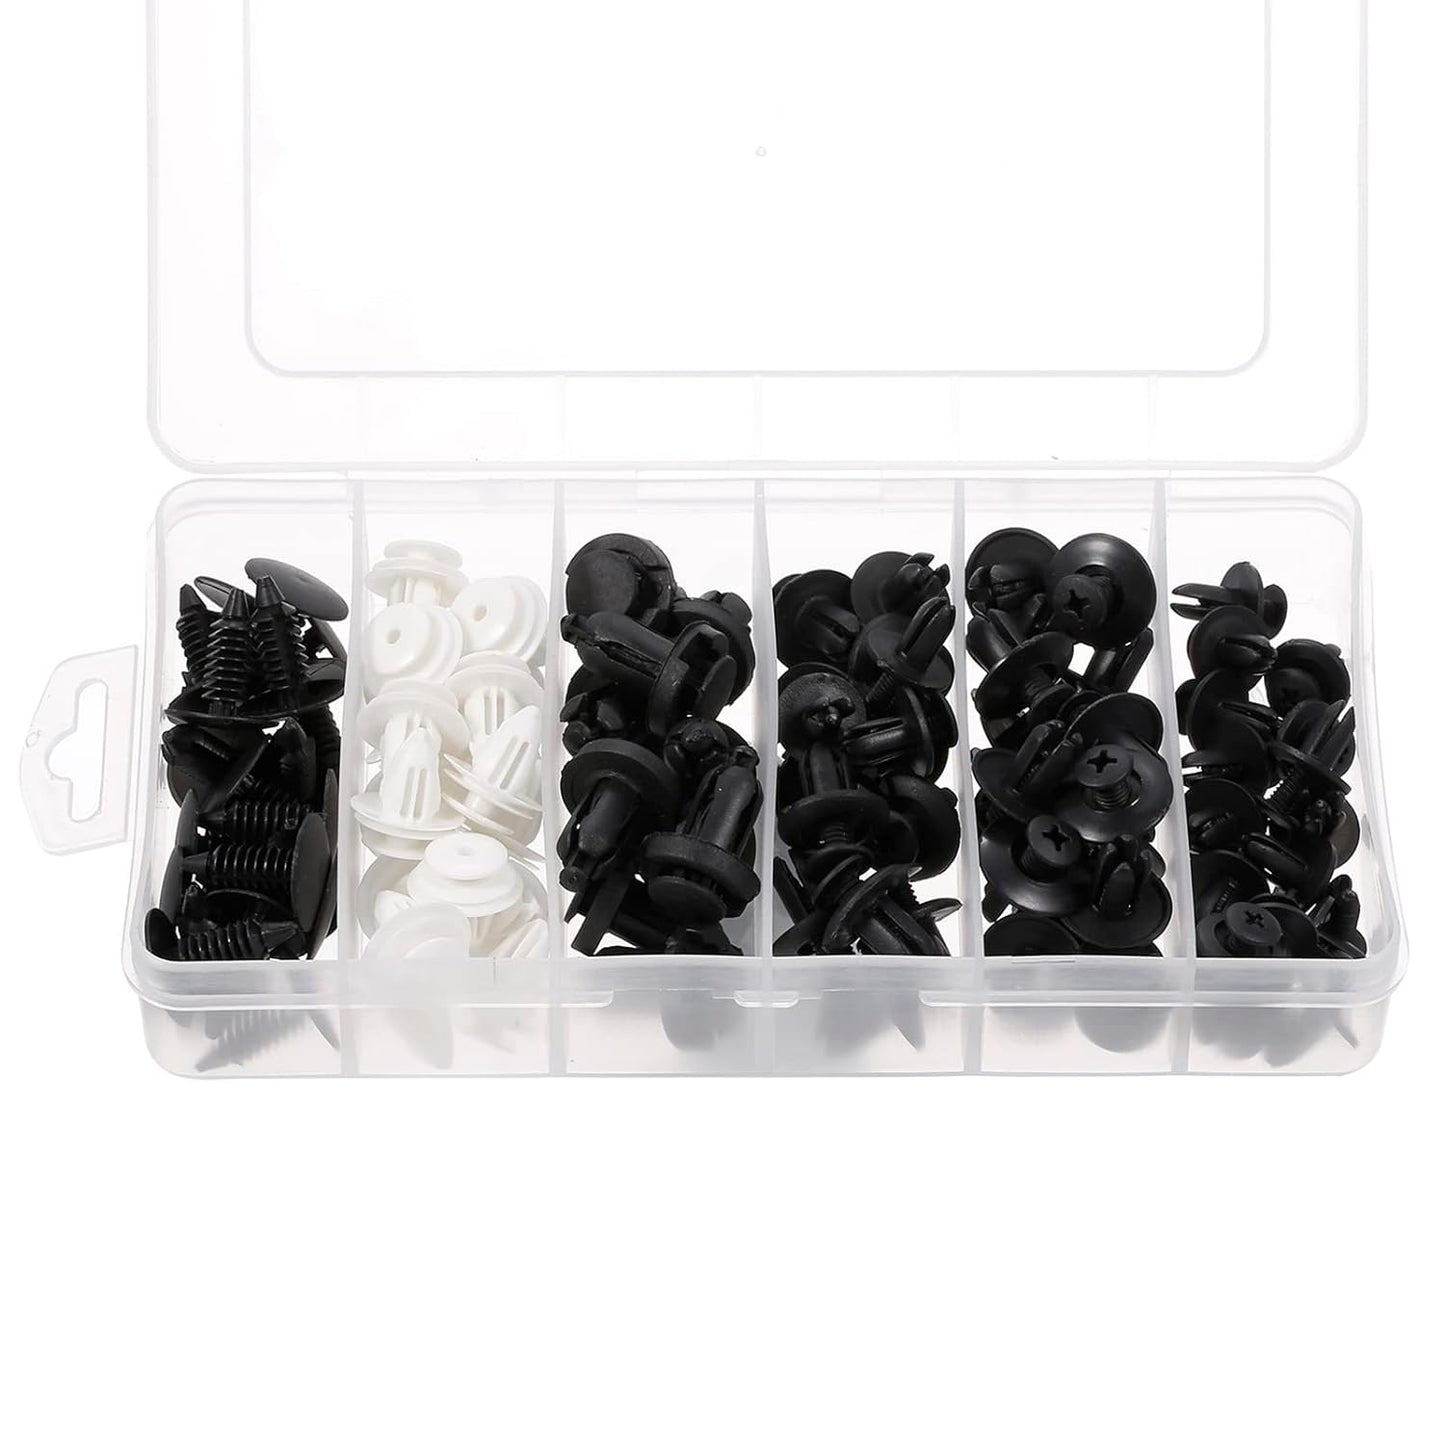 100Pcs Car Body Plastic Push Retainer Pin Rivet Fasteners Trim Moulding Clip Automotive Furniture Assembly Expansion Screws Kit with Removal Tool Screwdriver for Vehicles